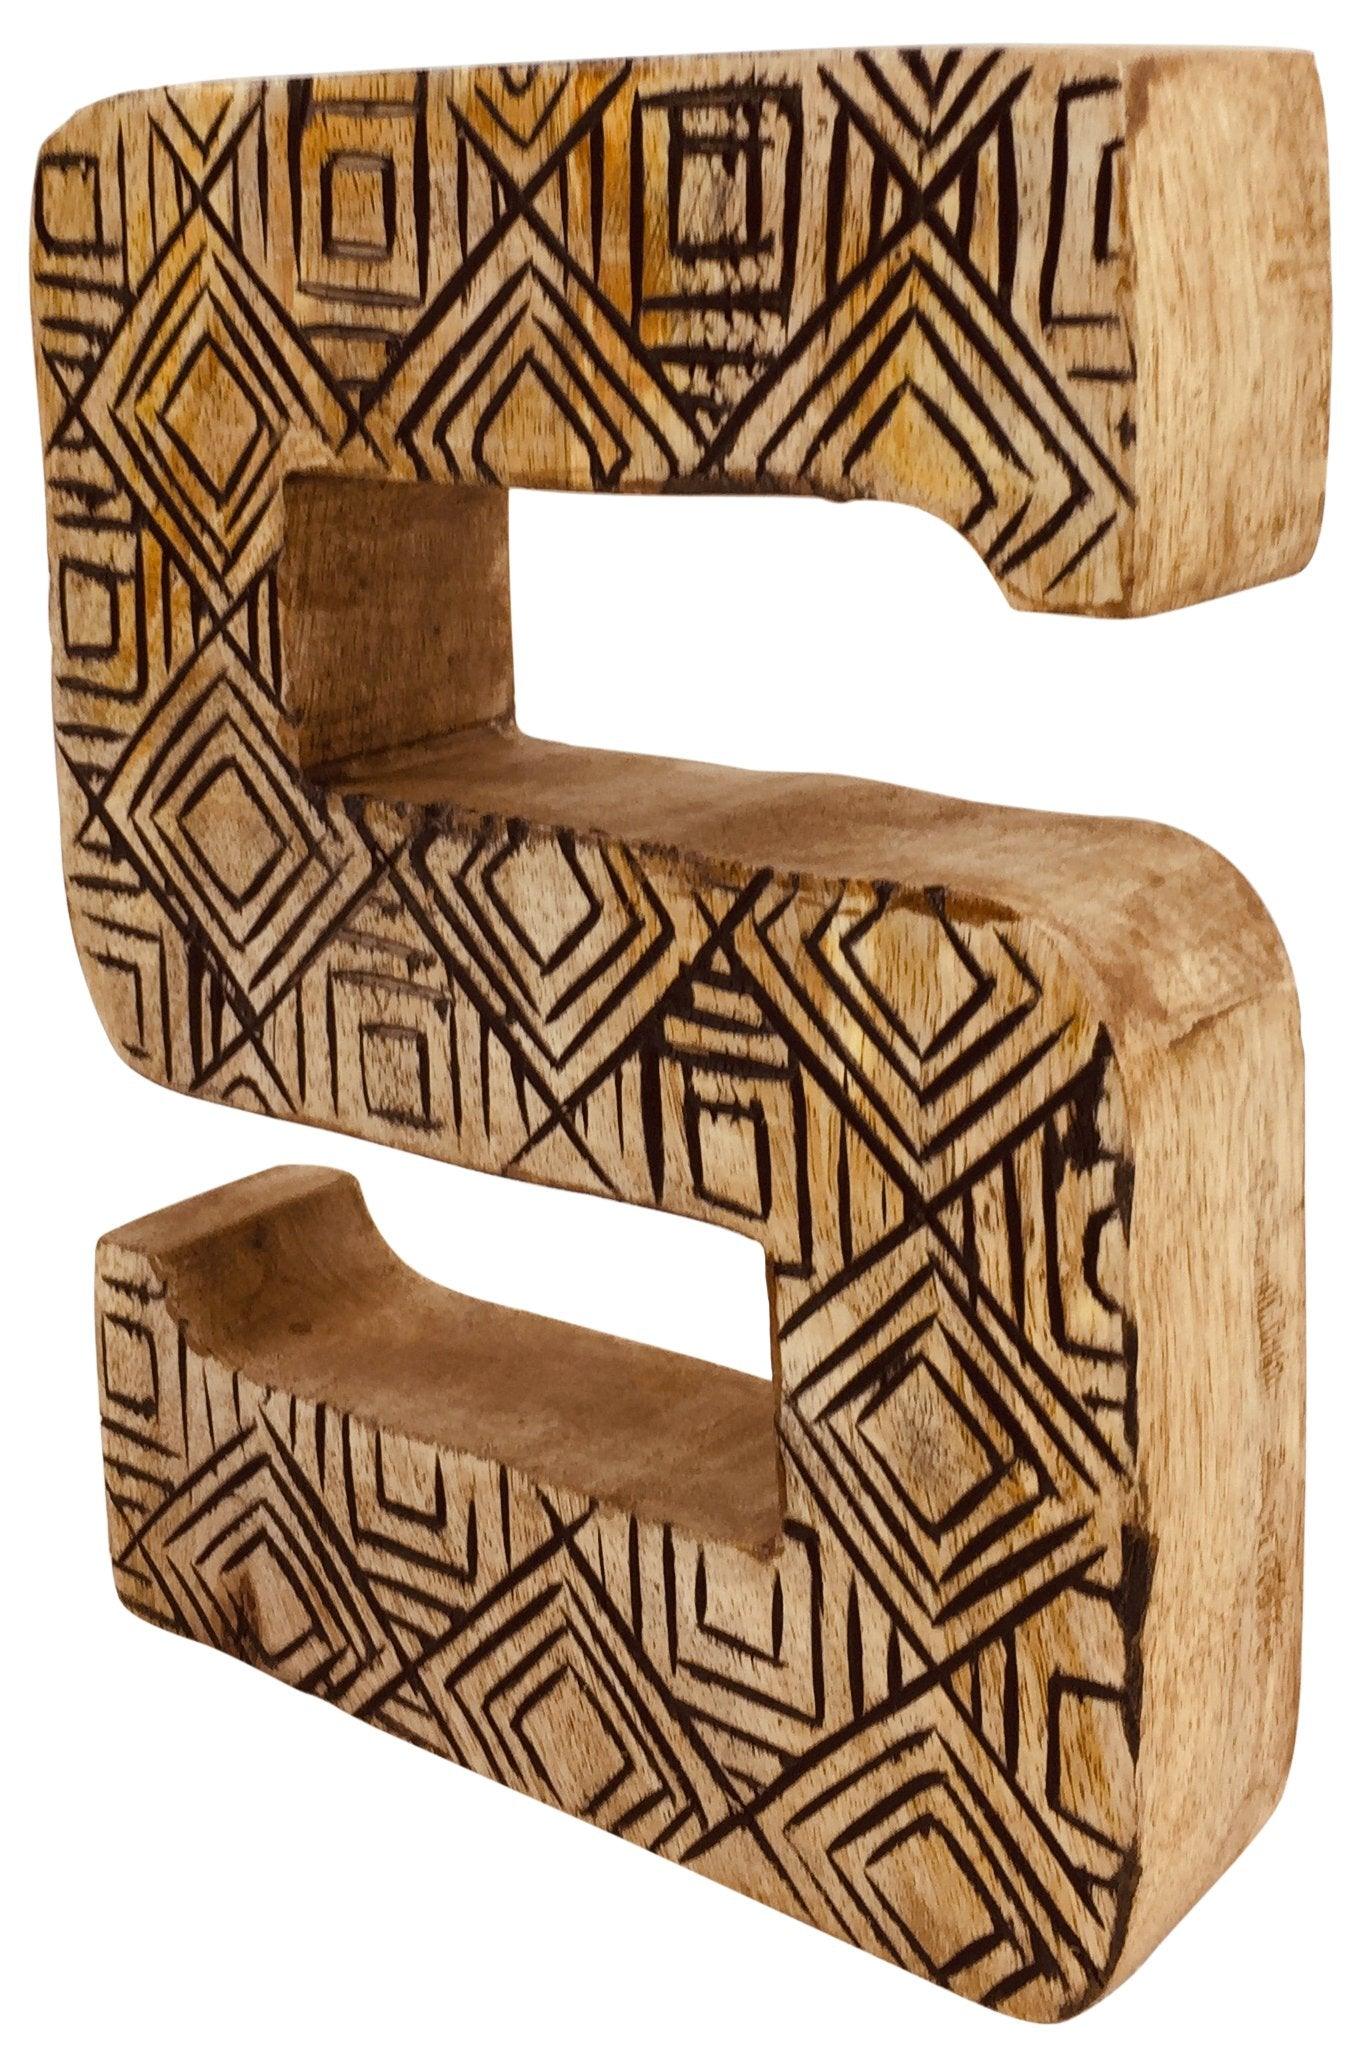 View Hand Carved Wooden Geometric Letter S information